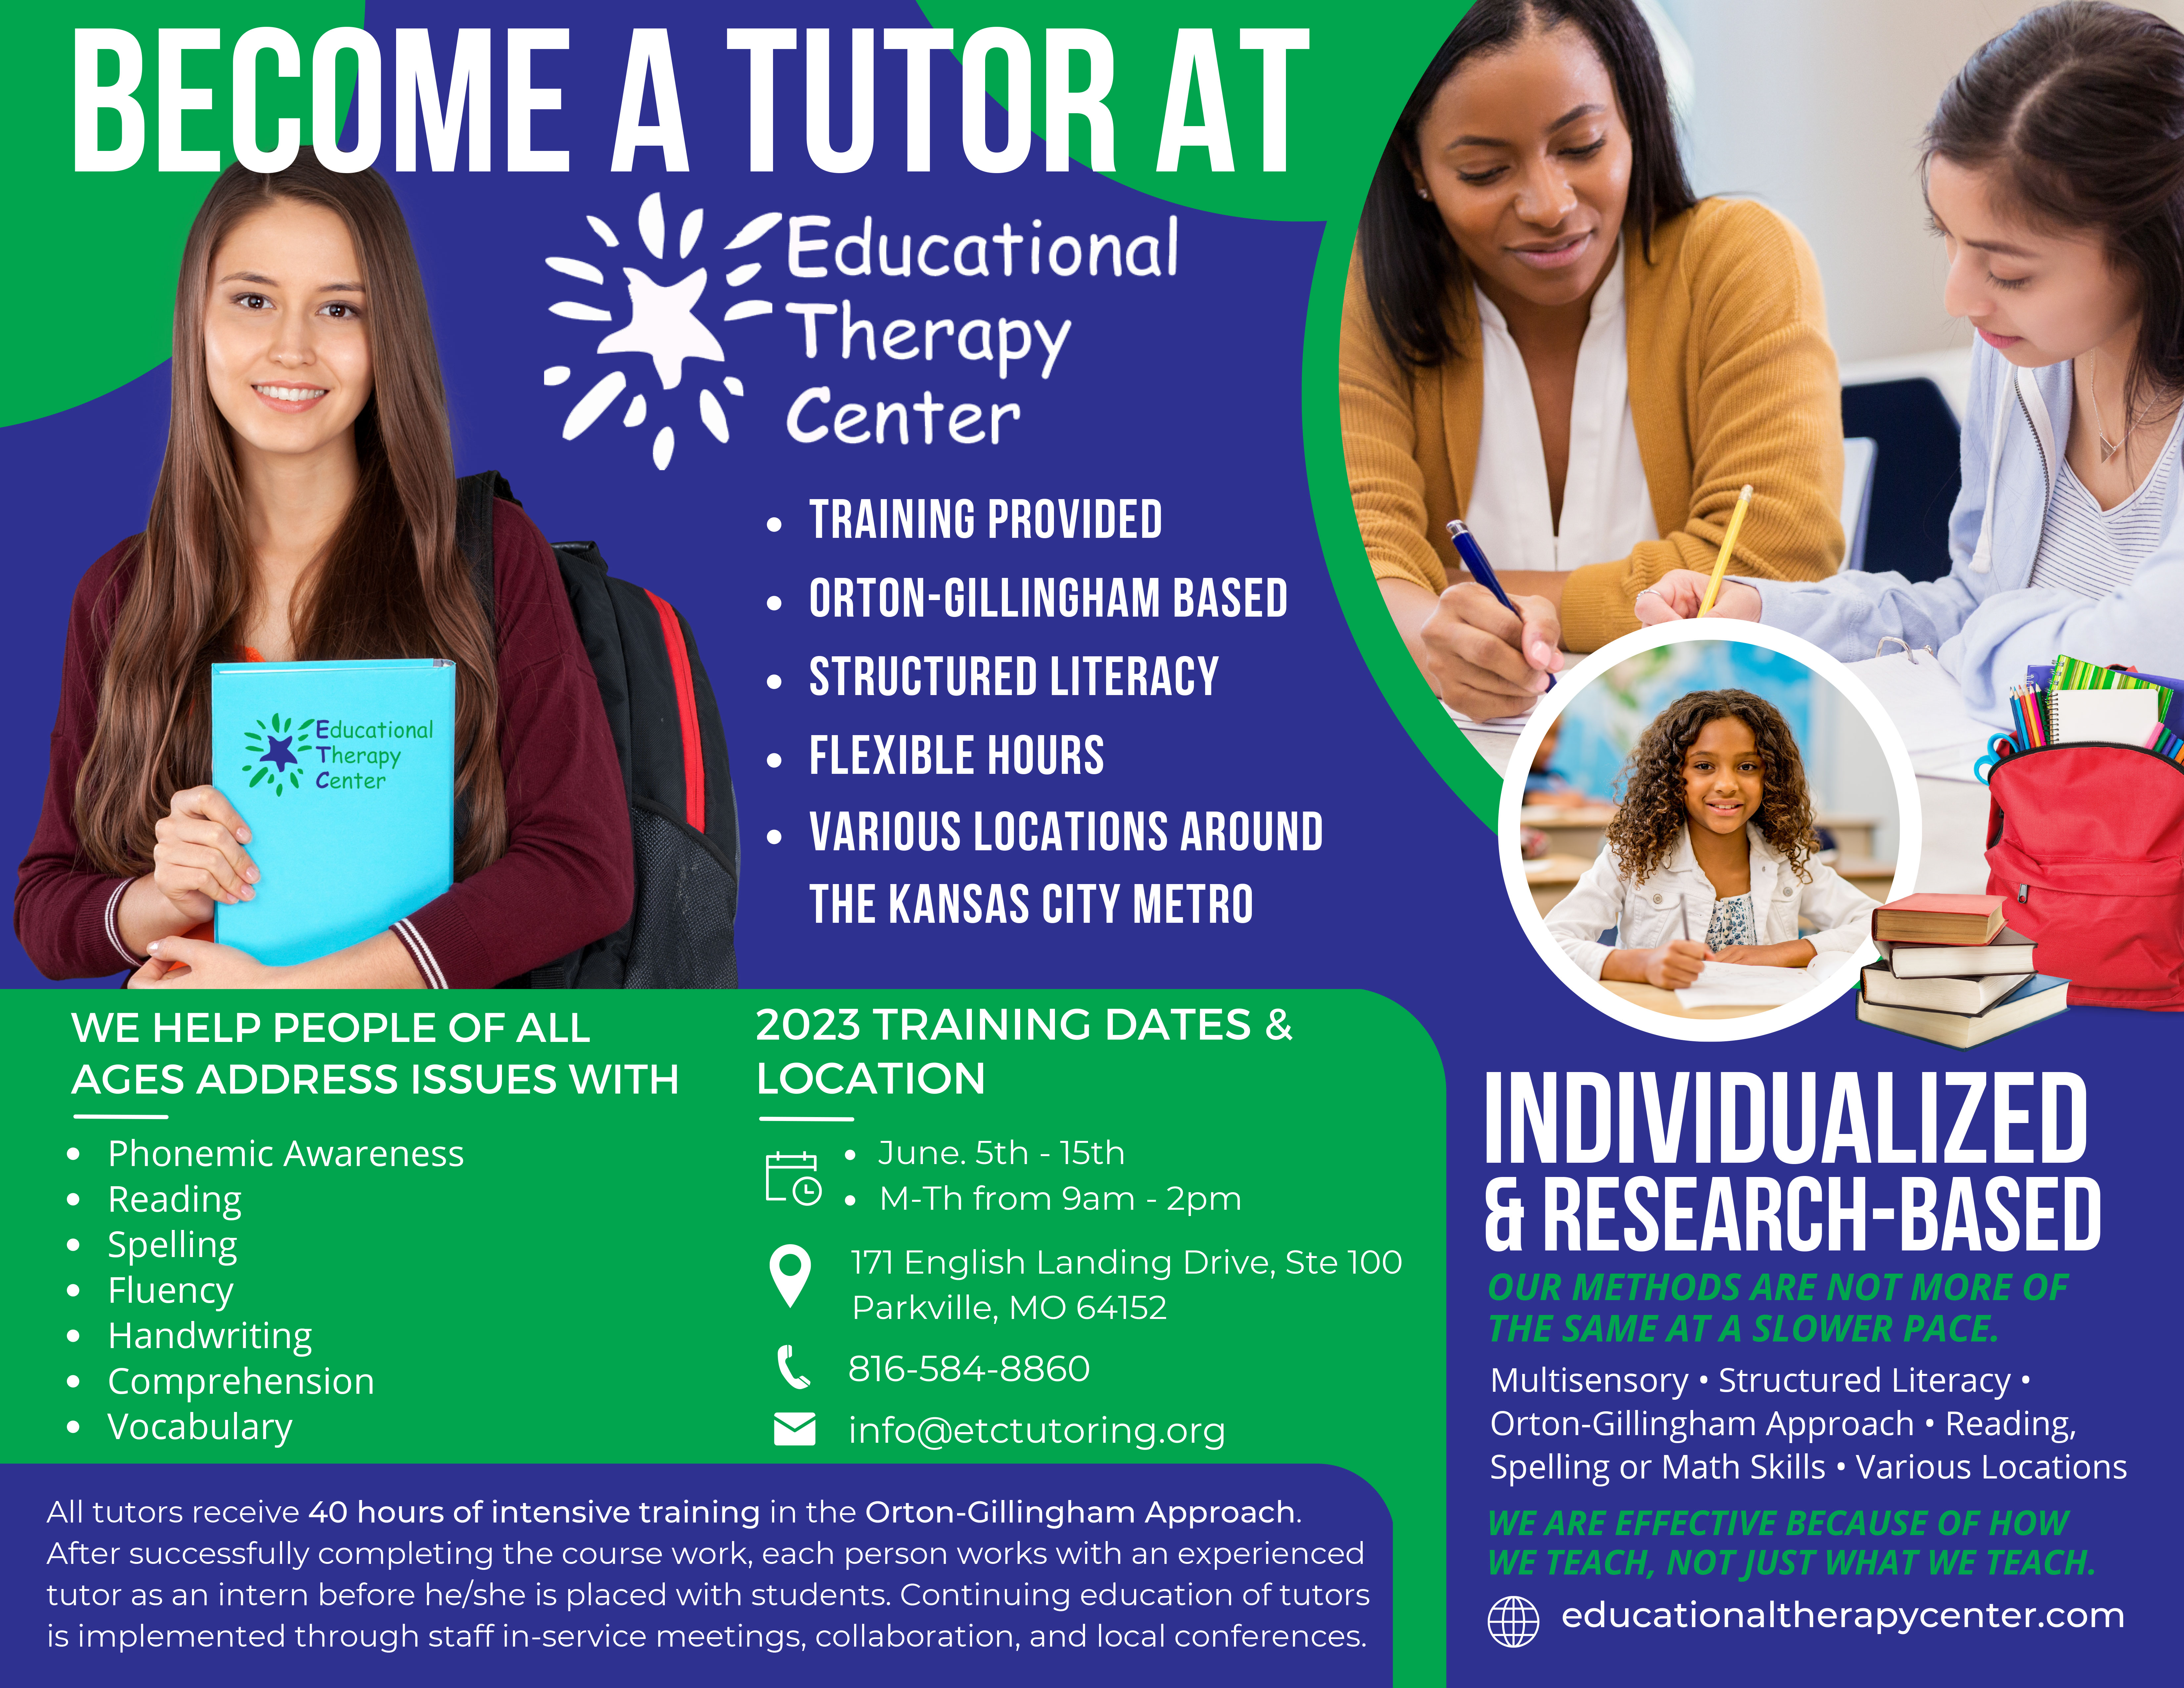 Become a Tutor at Educational Therapy Center 2023